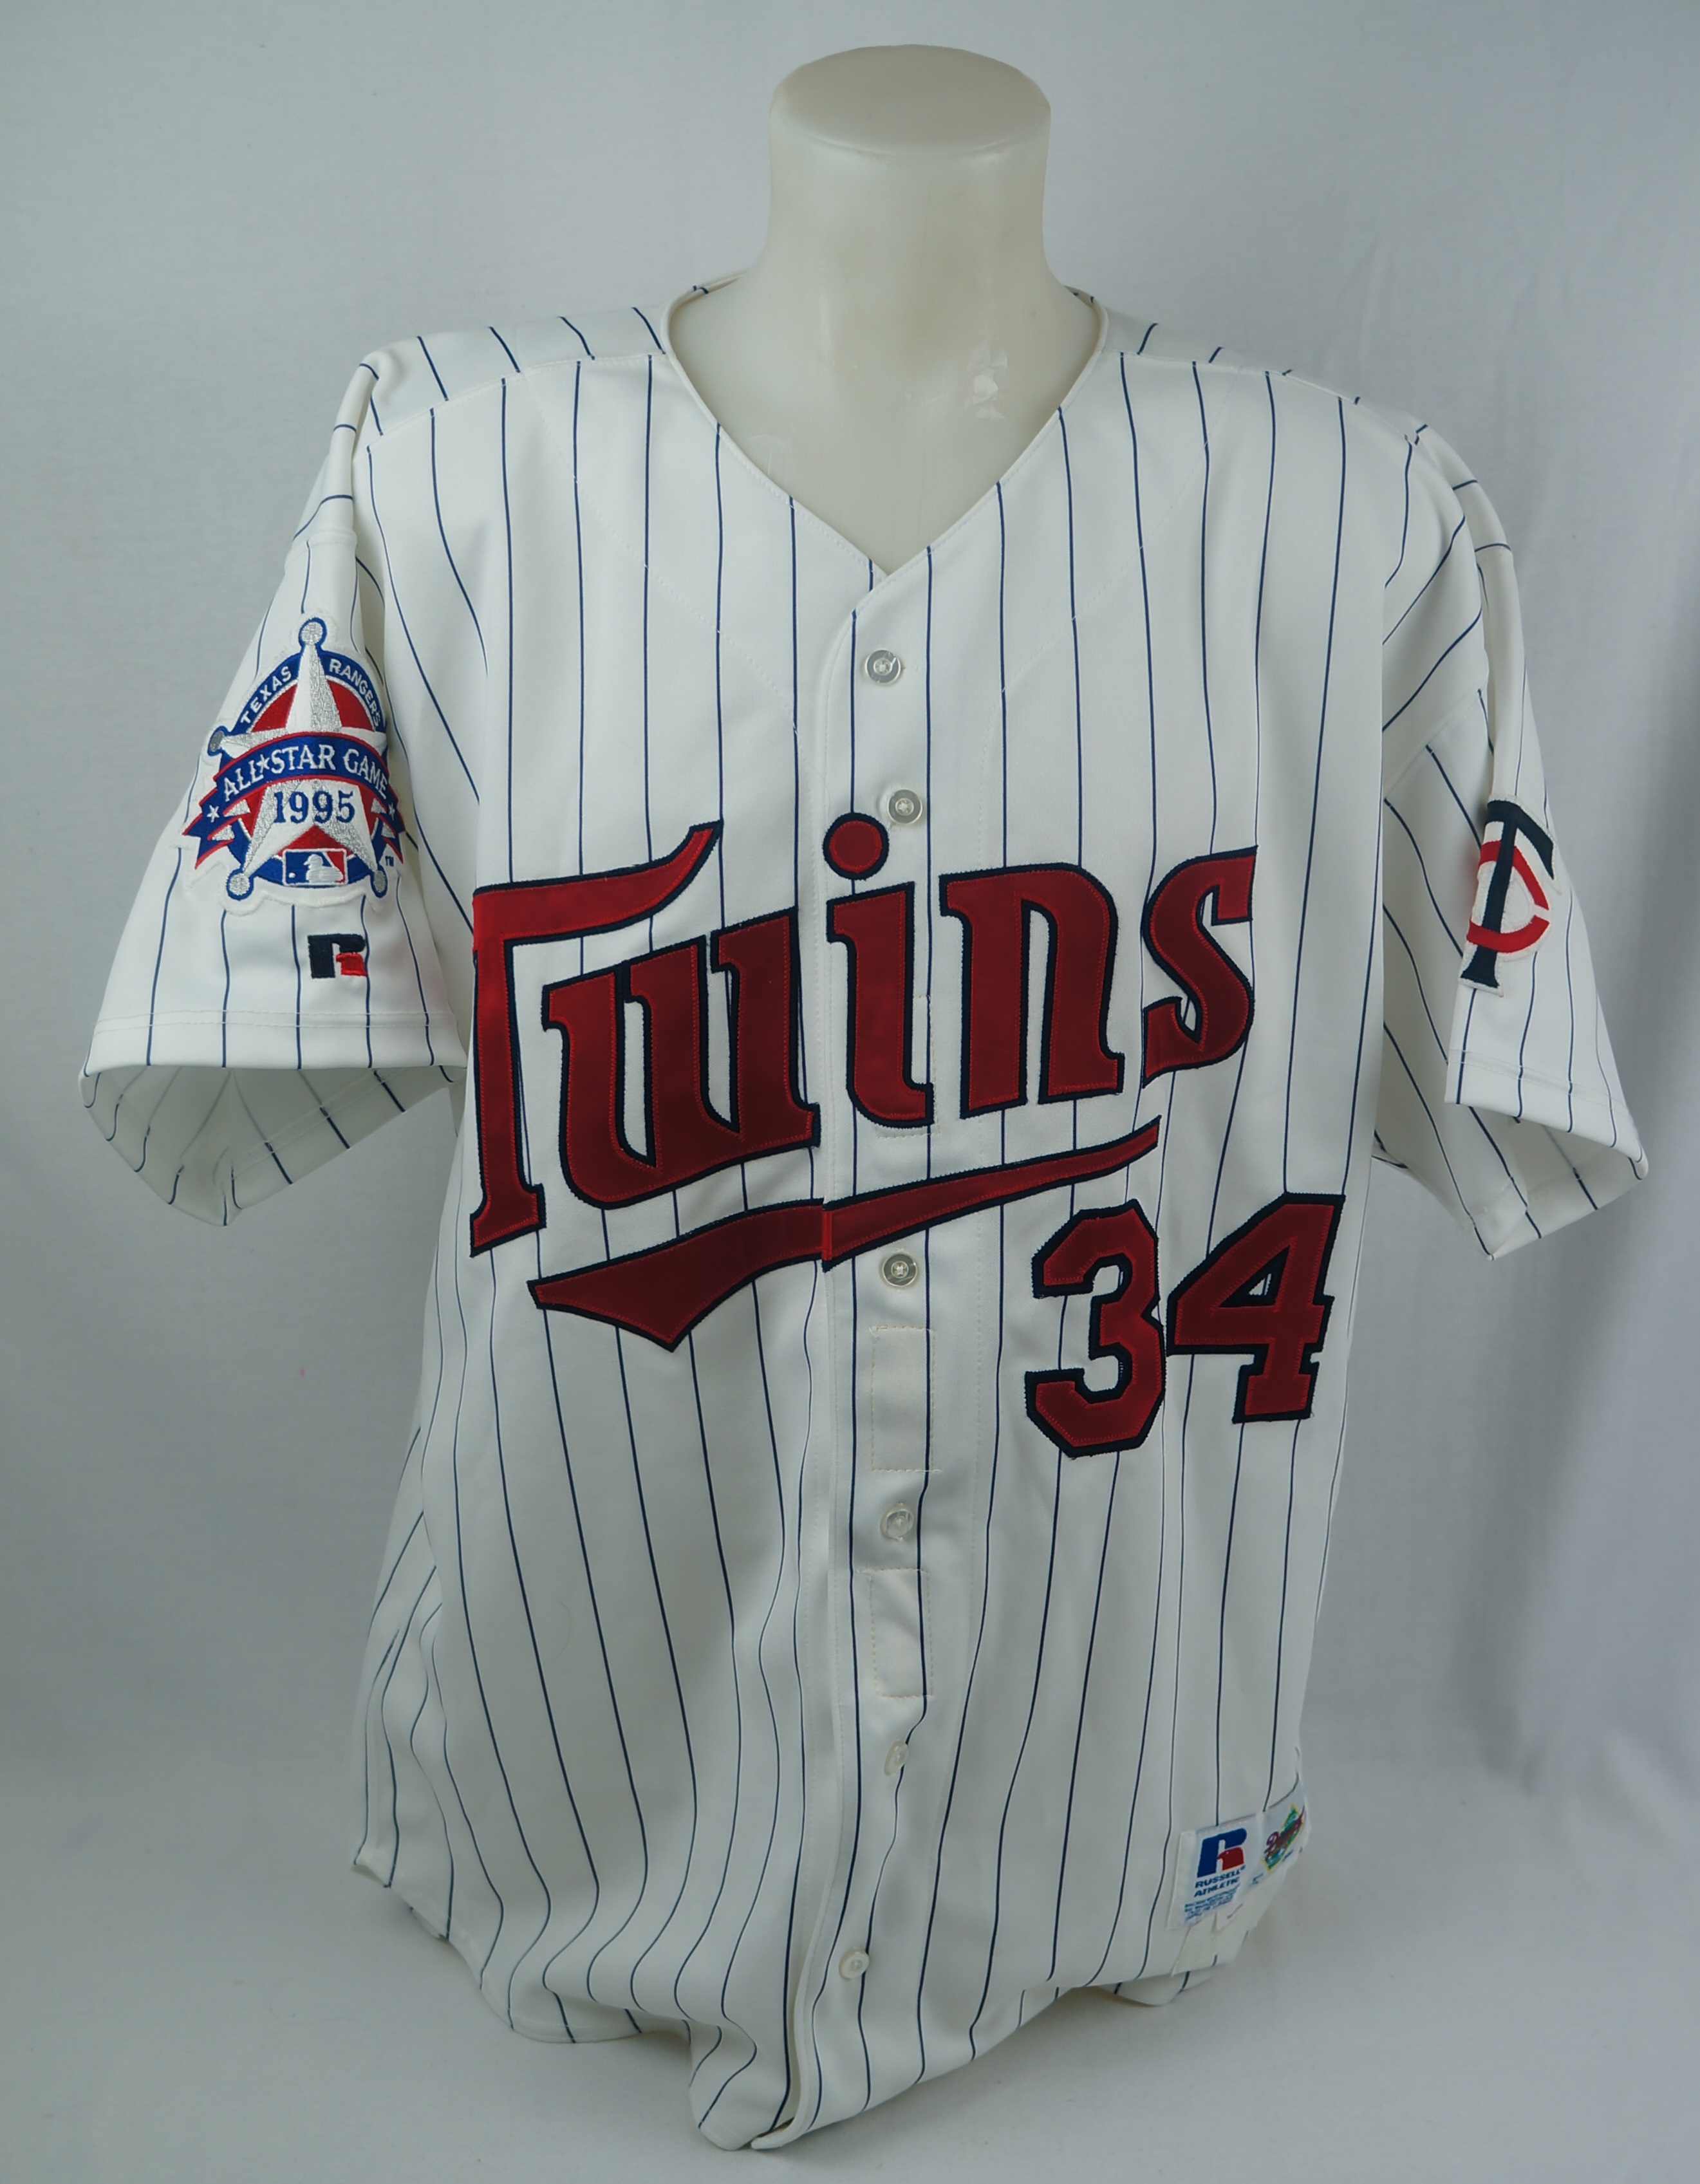 2007 Mlb All Star Jersey FOR SALE! - PicClick